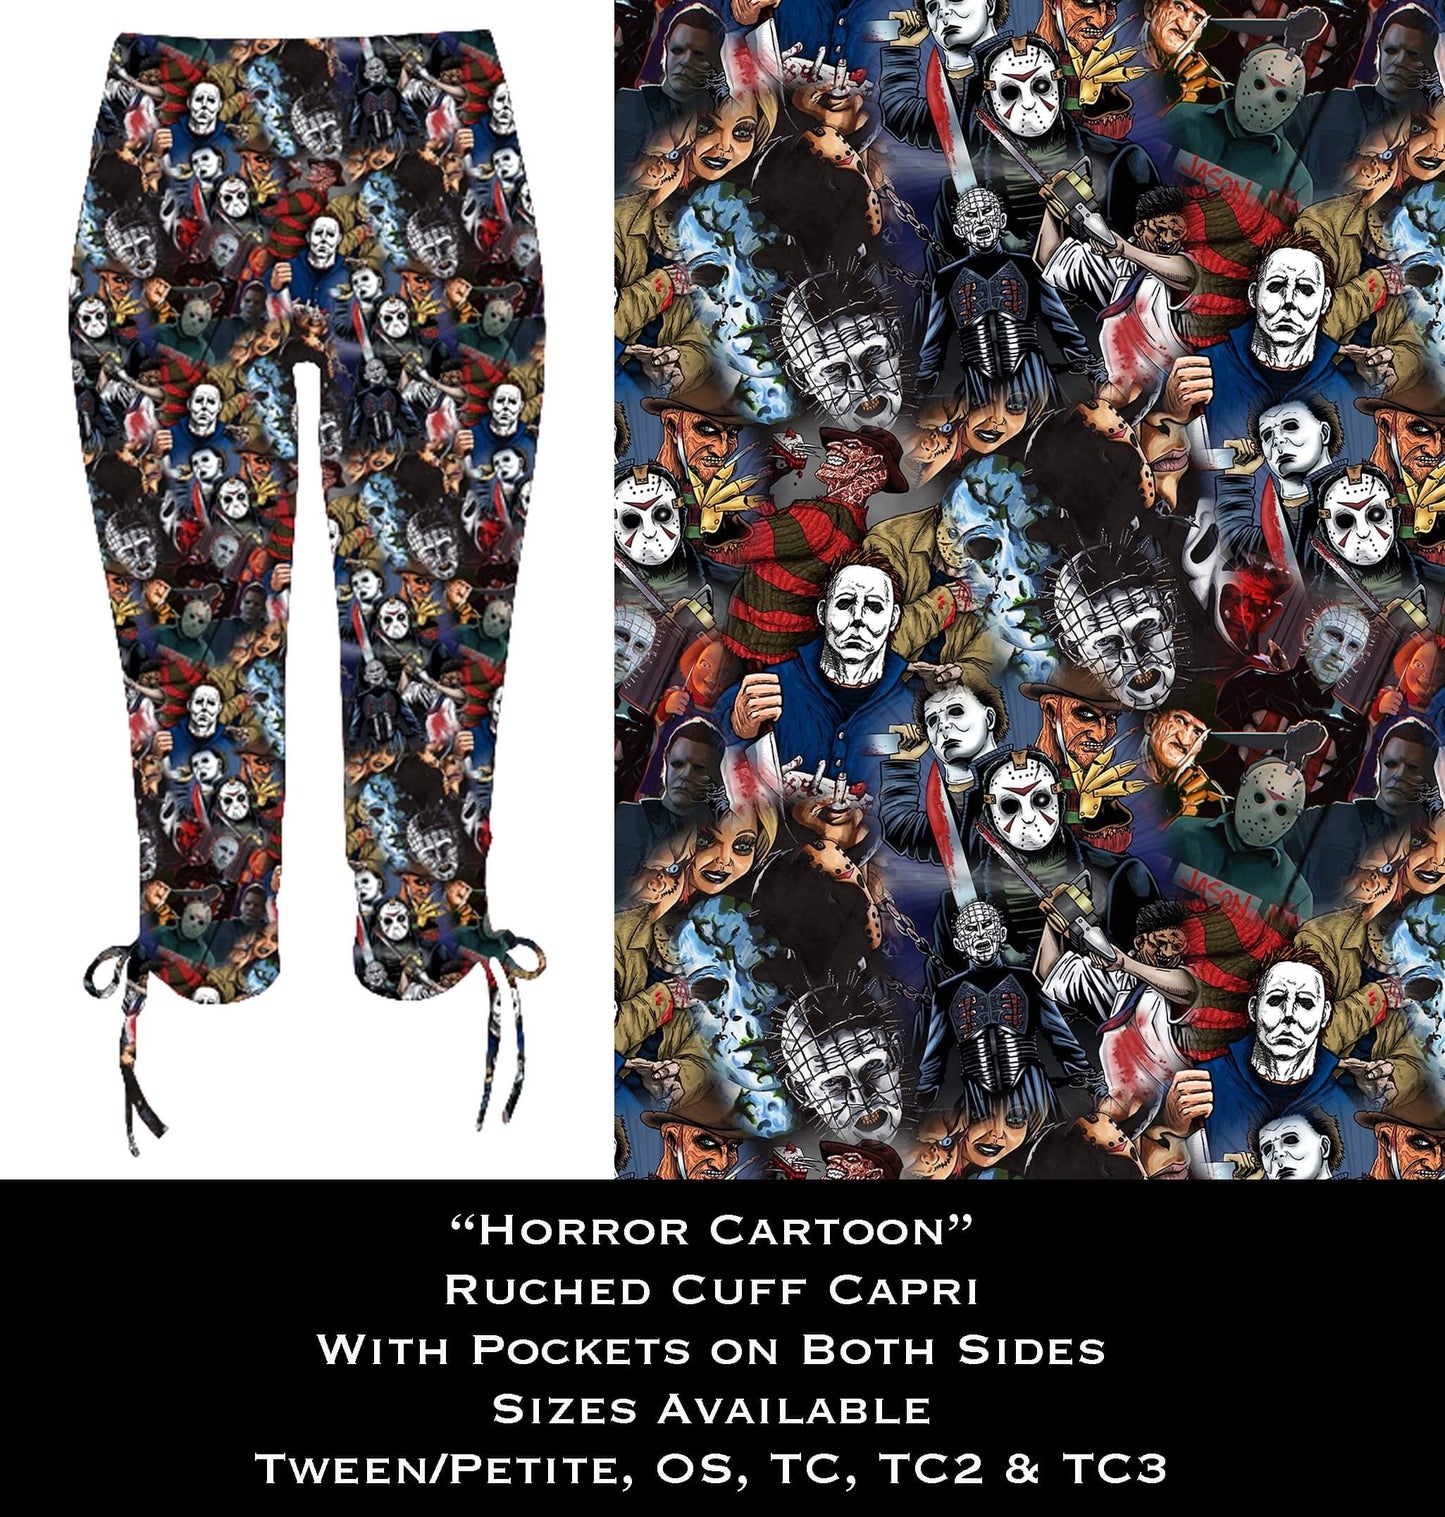 Horror Cartoon Ruched Cuff Capris with Side Pockets